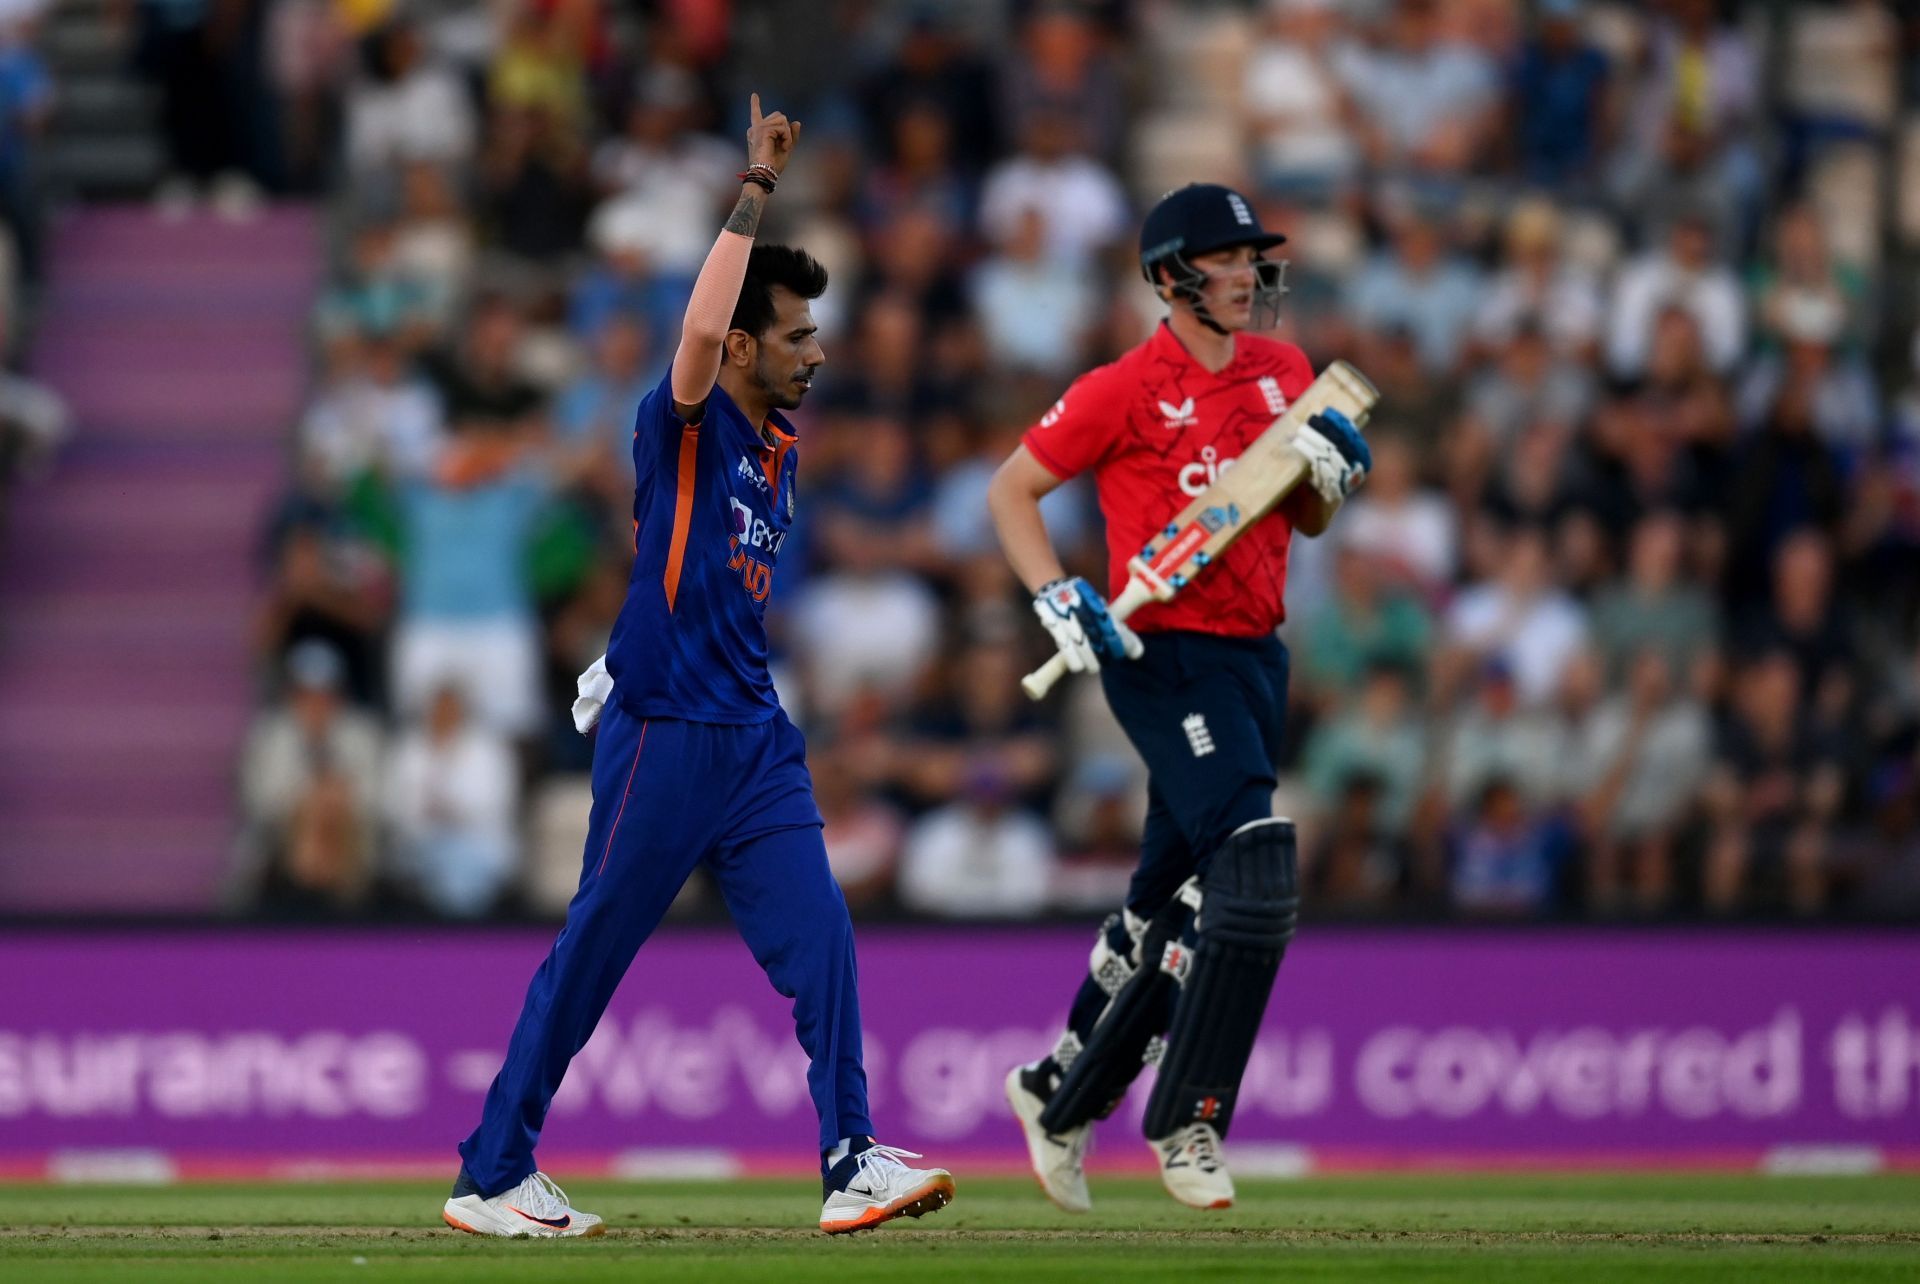 Yuzvendra Chahal snared two wickets in the first T20I against England